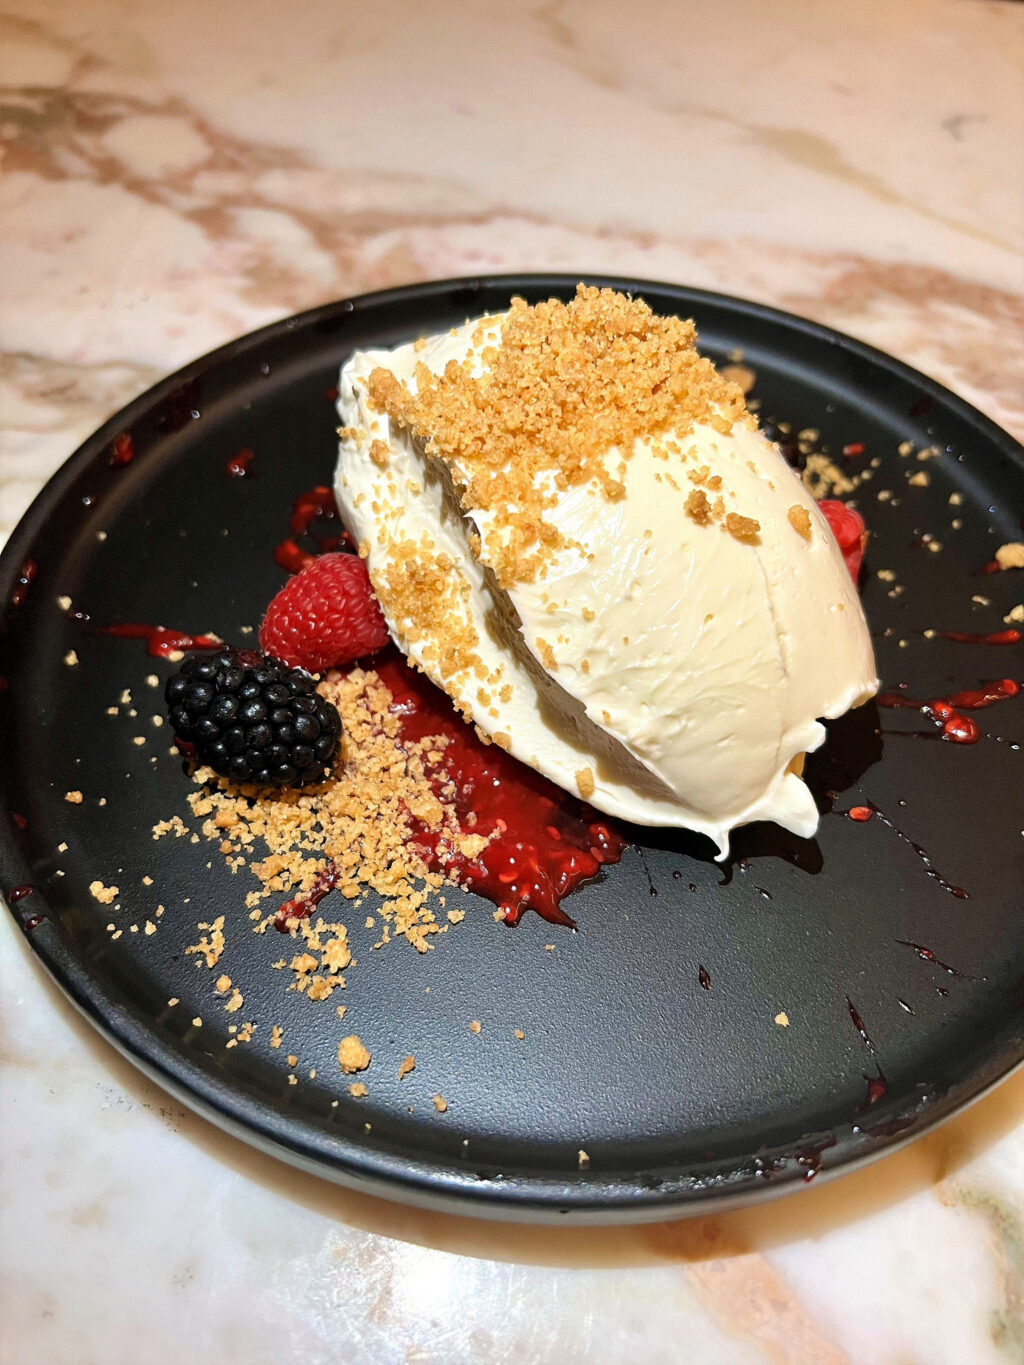 Deconstructed cheesecake